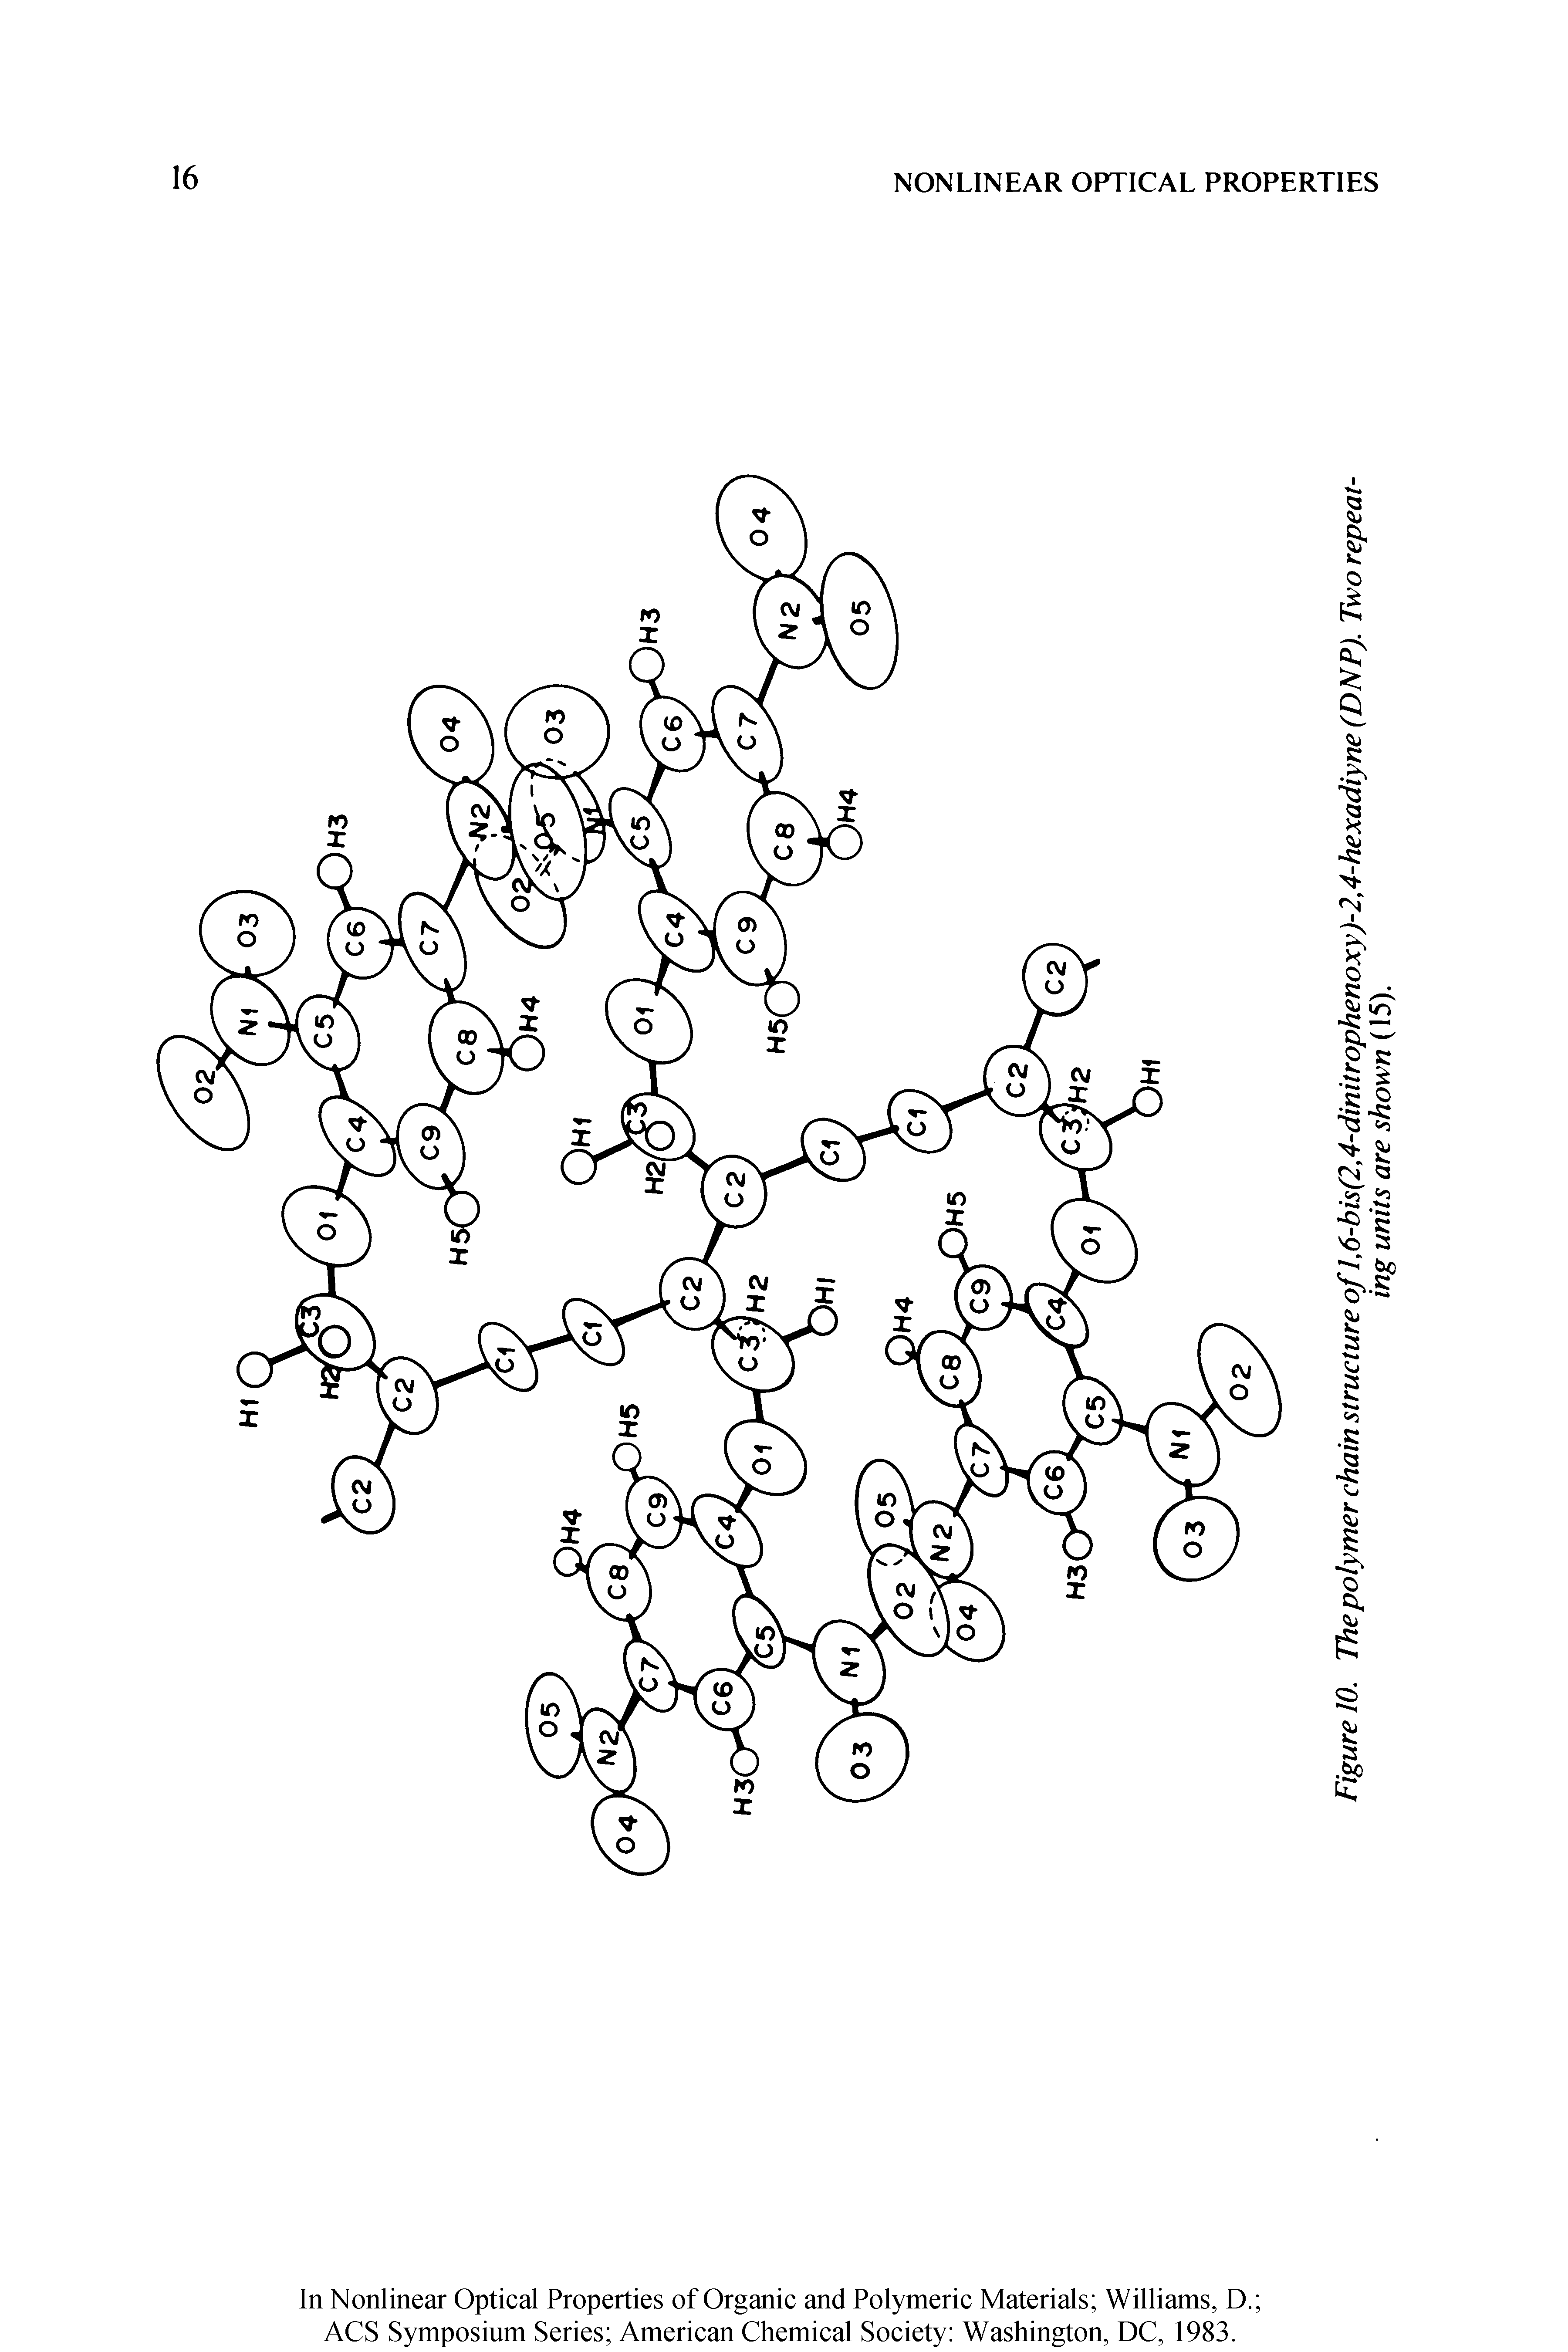 Figure 10. The polymer chain structure of 1,6-bis(2,4-dinitrophenoxy)-2,4-hexadiyne (DNP). Two repeating units are shown (15).